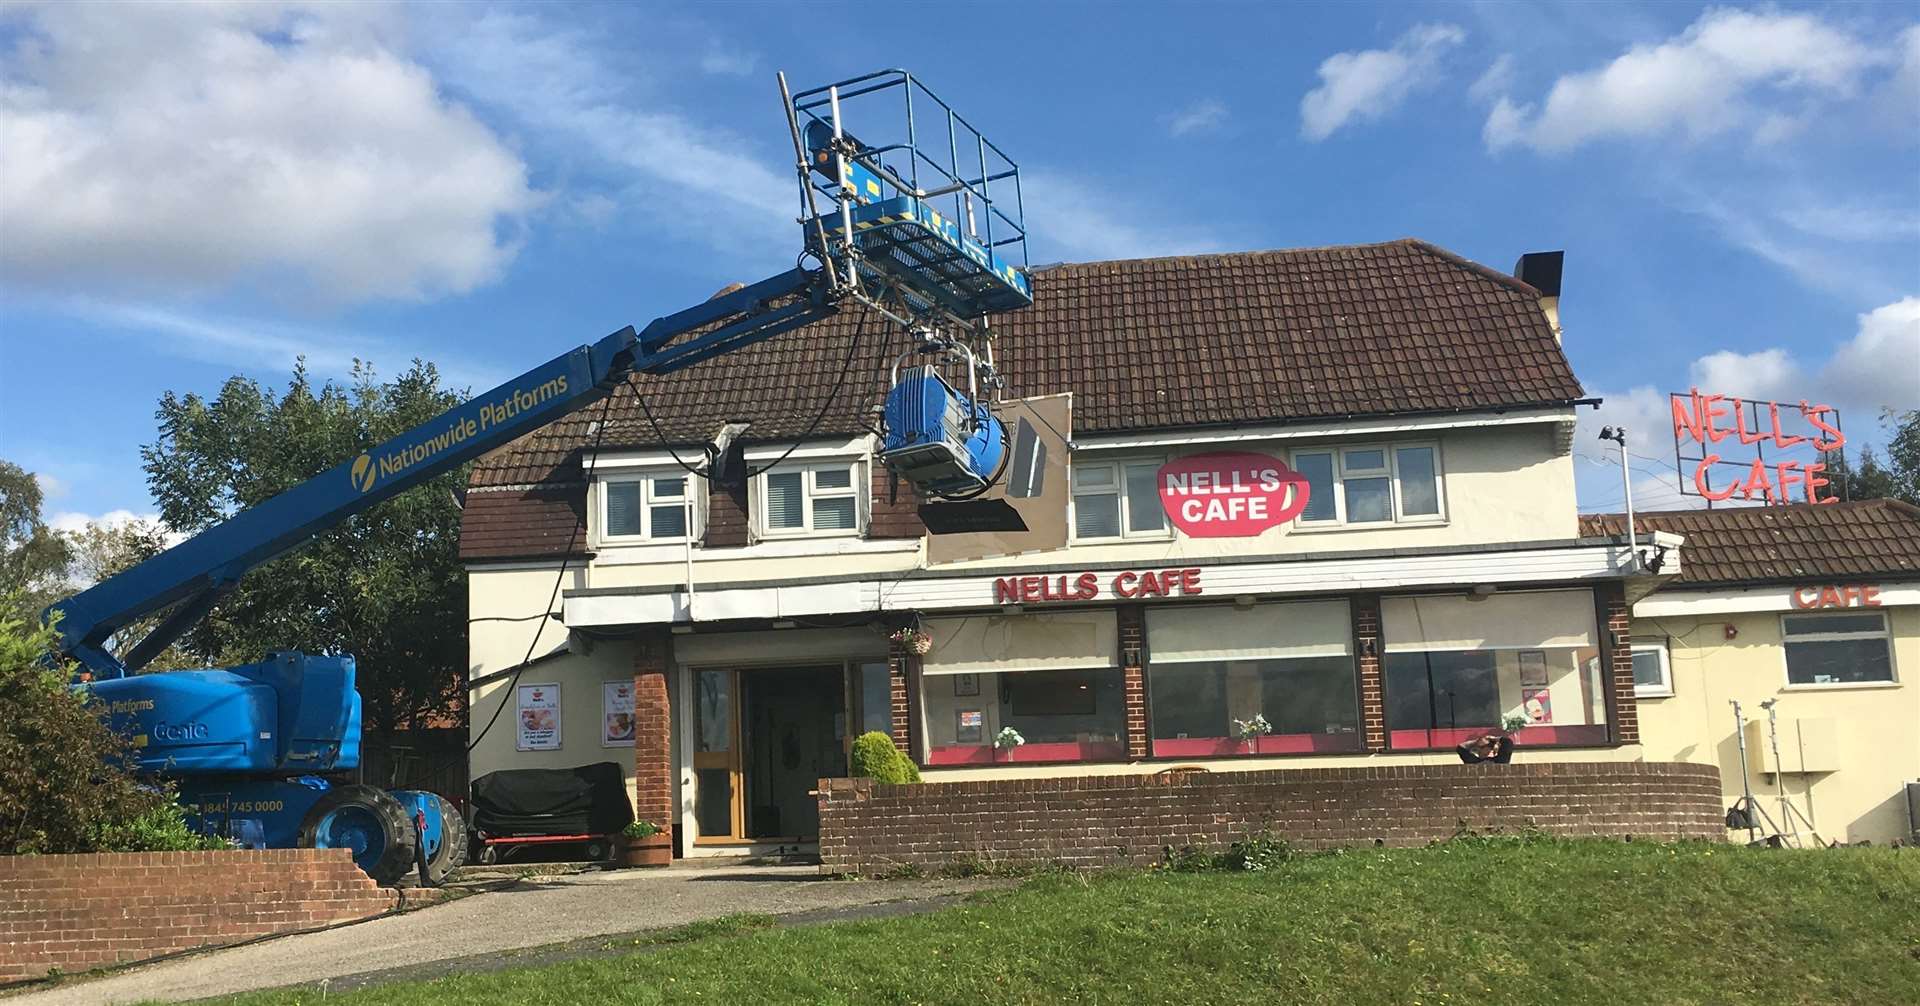 Film crews at Nell's cafe in Gravesend filming for BBC drama Killing Eve